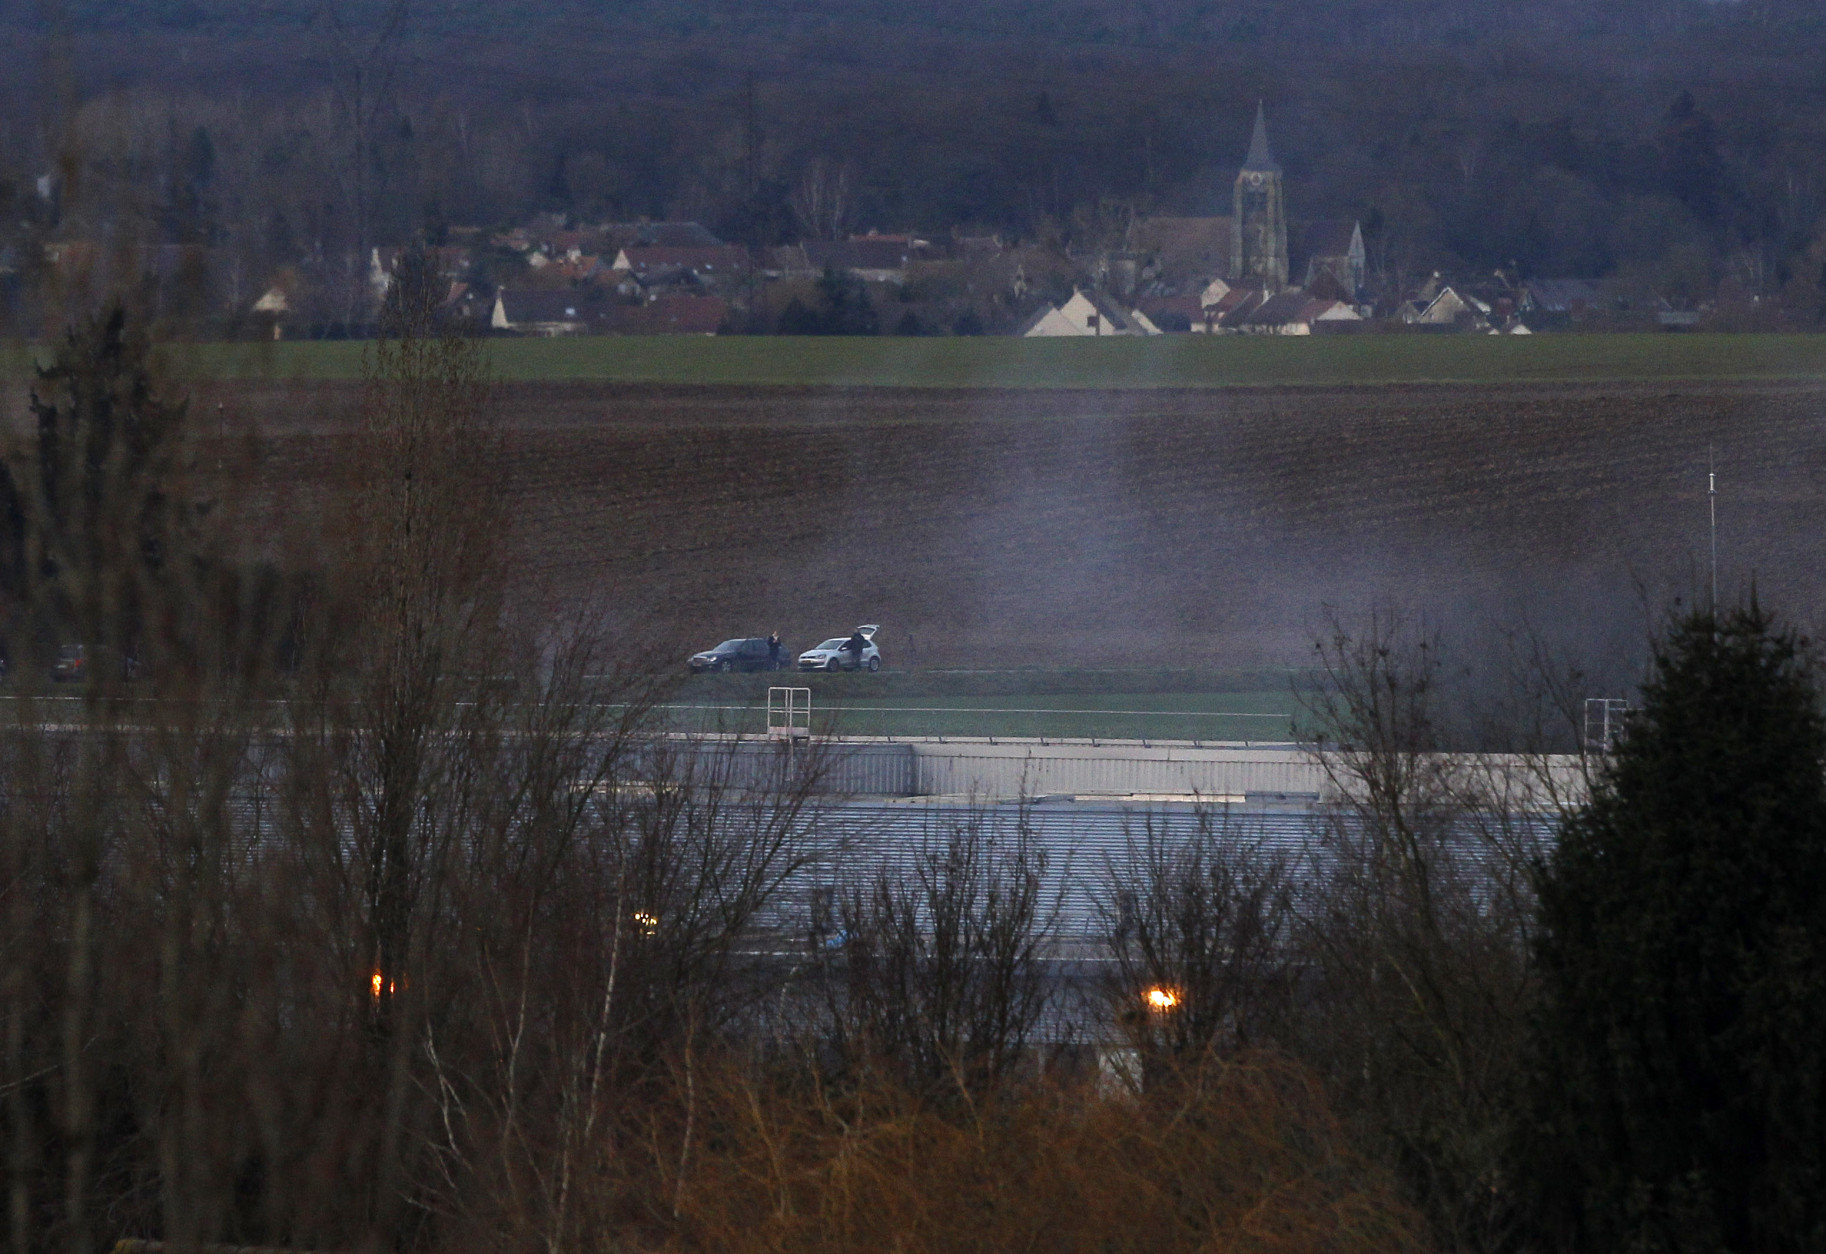 Smoke rises from a building in Dammartin-en-Goele, northeast of Paris, where the two brothers suspected in a deadly terror attack were cornered, Friday, Jan. 9, 2015. Explosions and gunshots rang out and smoke rose outside a building where two brothers suspected in a newspaper massacre are holed up with a hostage. (AP Photo/Michel Spingler)